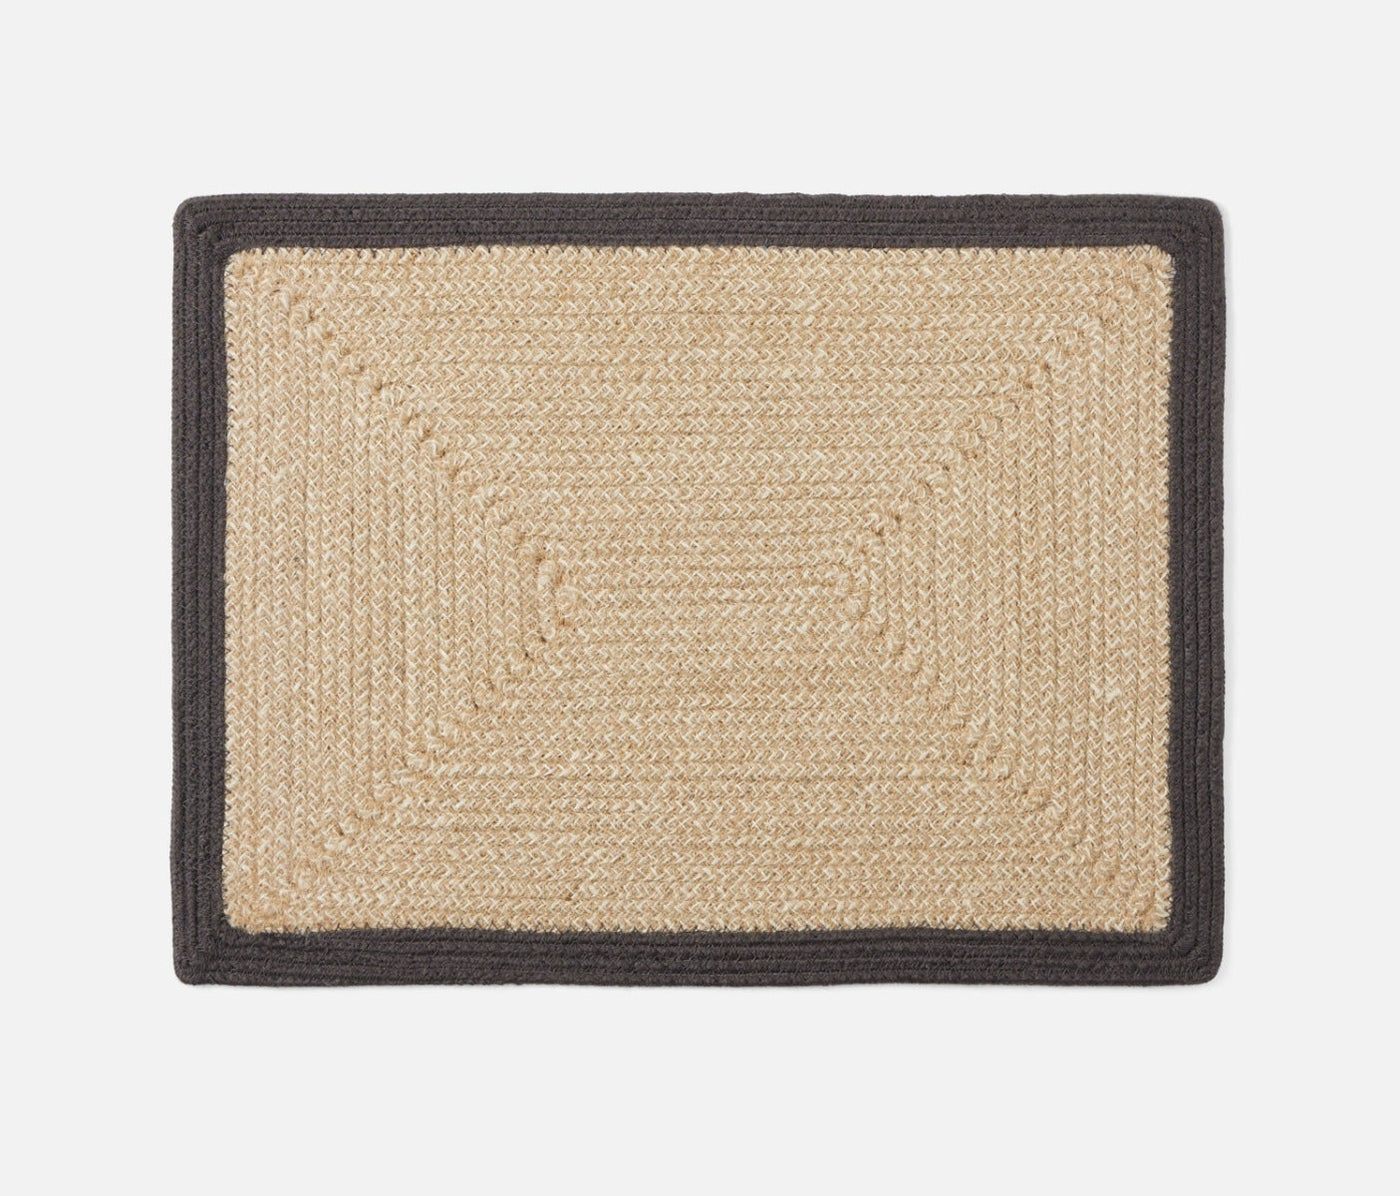 PLACEMAT DARK GRAY JUTE/COTTON (Available in 2 Sizes)